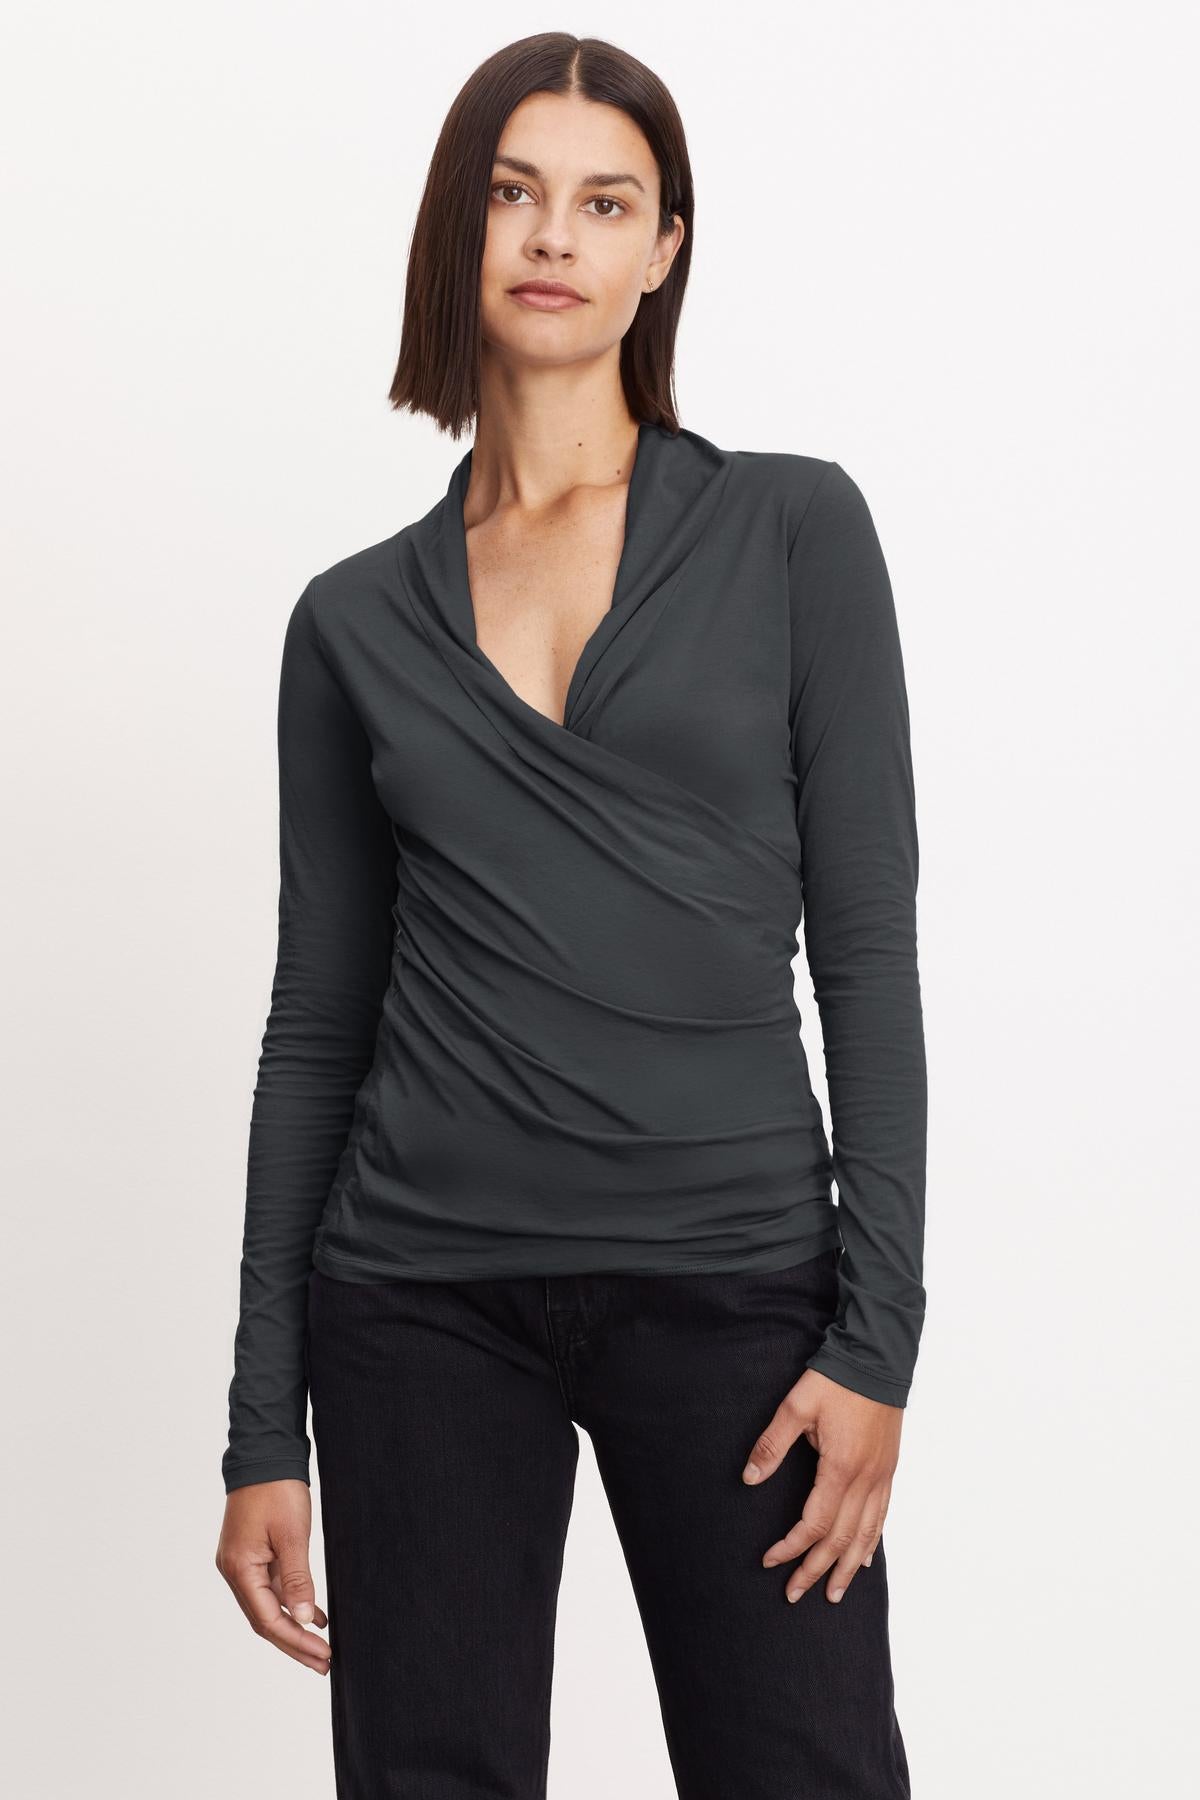   A woman wearing a Velvet by Graham & Spencer MERI WRAP FRONT FITTED TOP, grey long-sleeved top. 